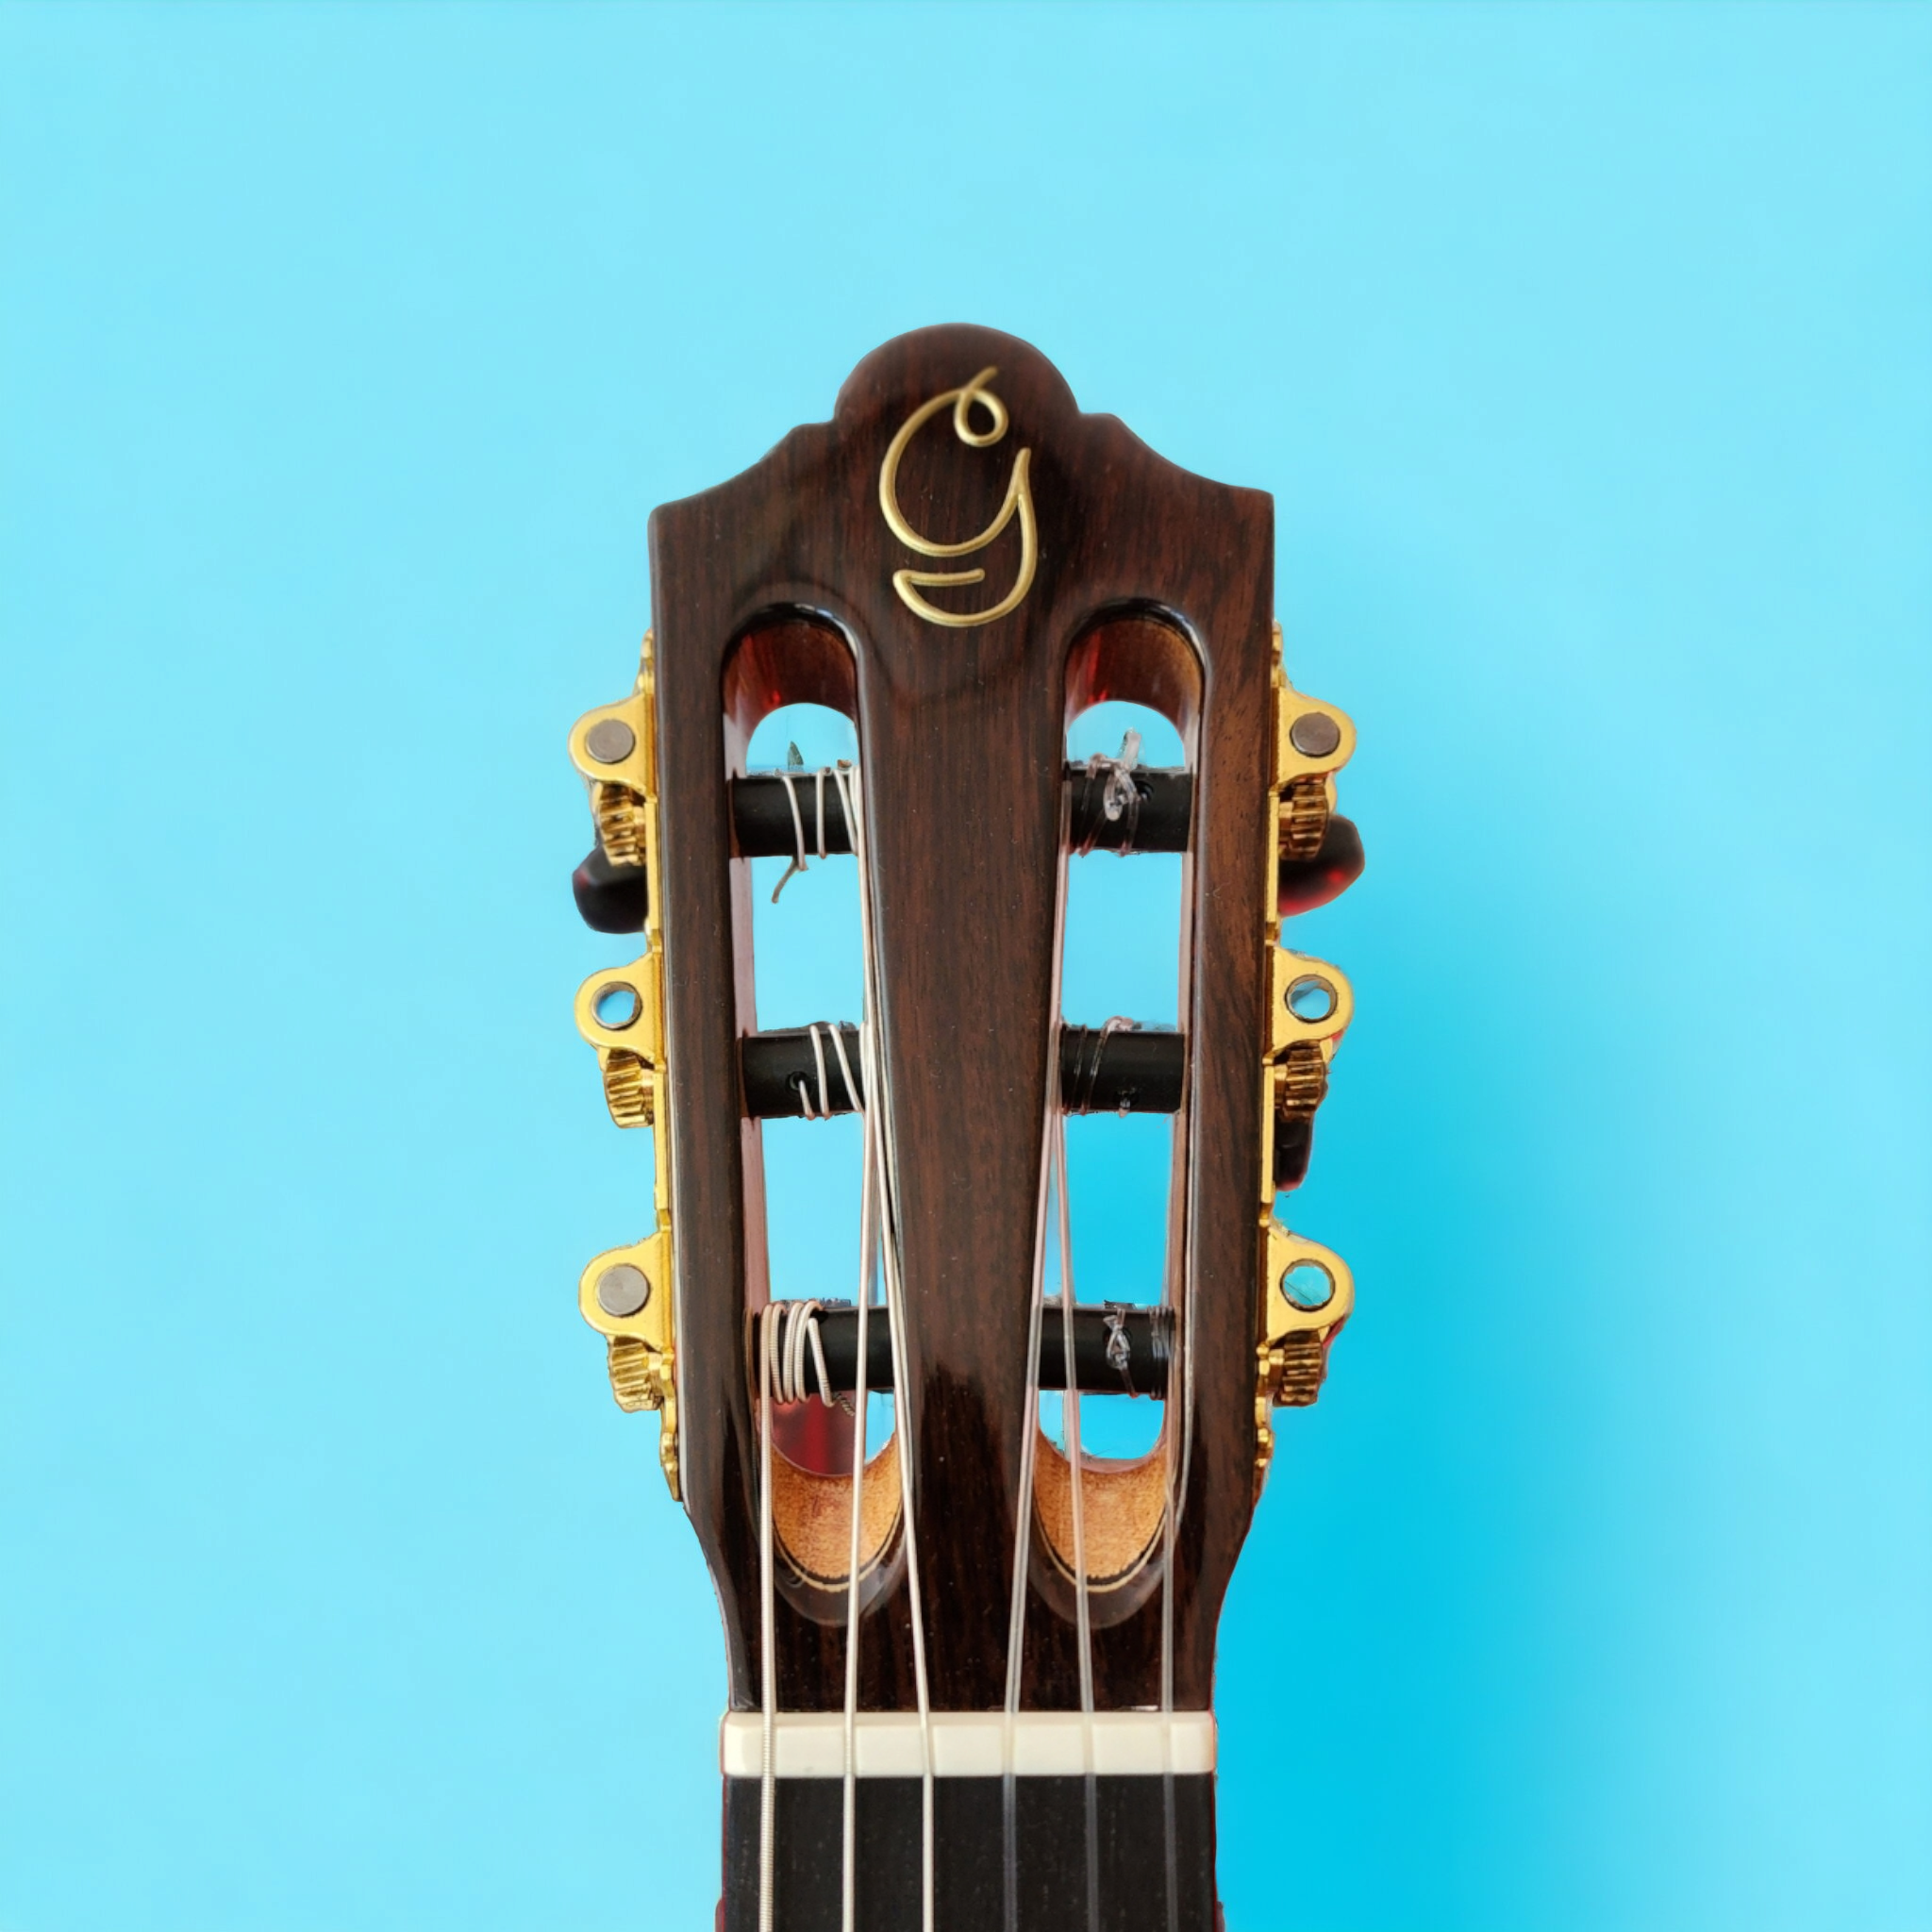 Why Buy a Nylon String Guitar: The Soulful Strumming Experience